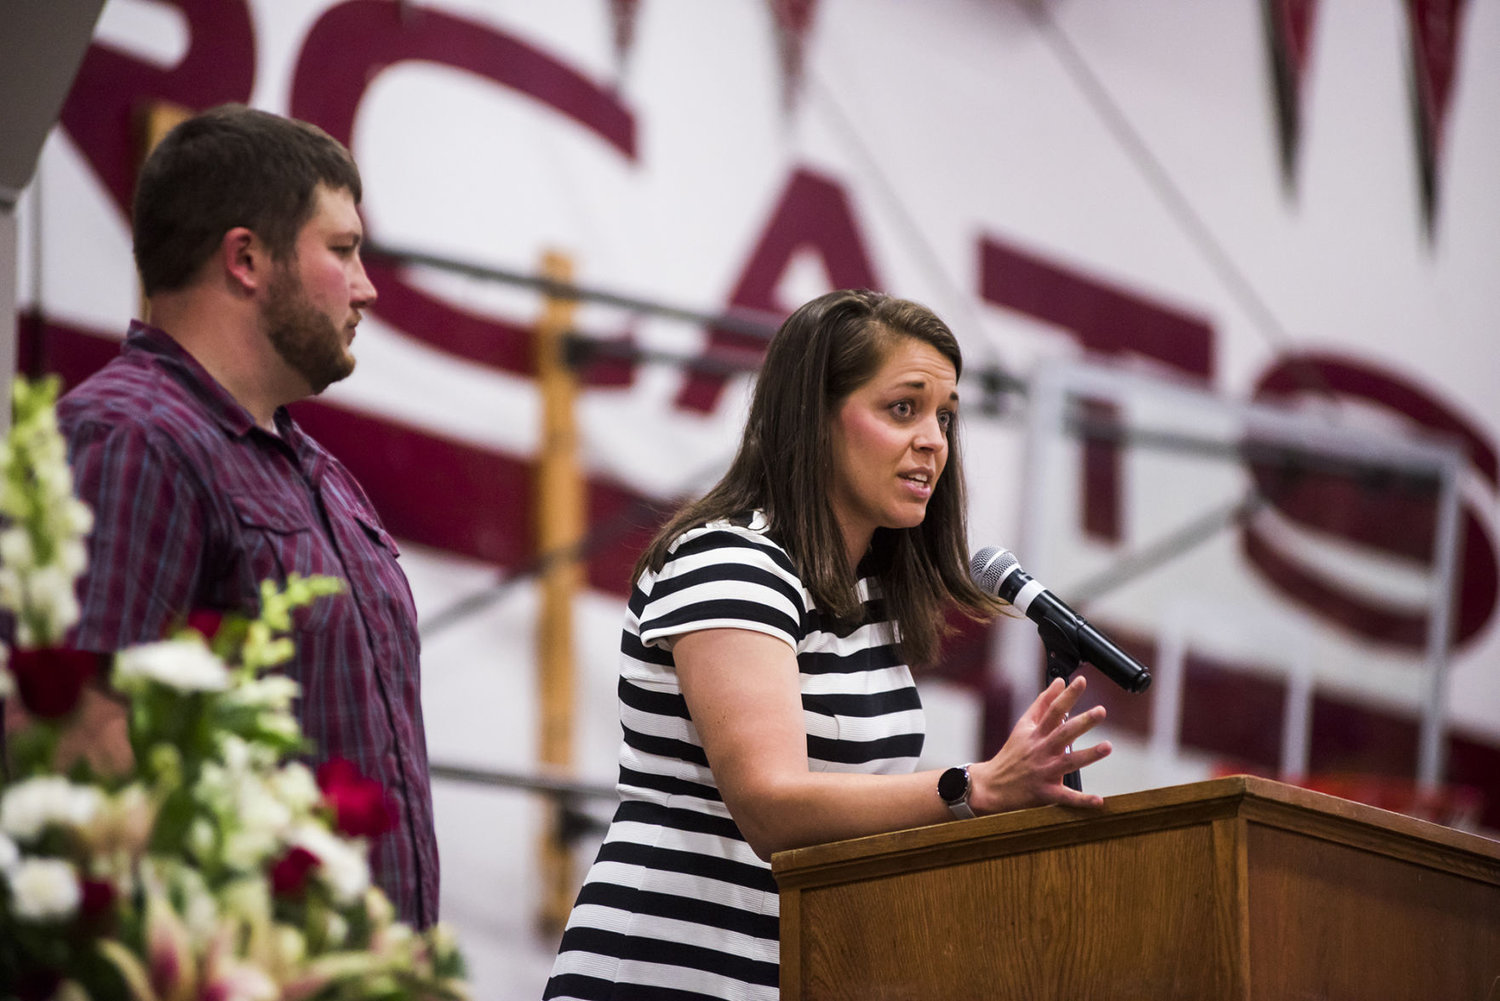 W.F. West teacher and softball coach Caty Lieseke talks about her students and athletes during the W.F. West Class of 2019 graduation on June 10, 2019.